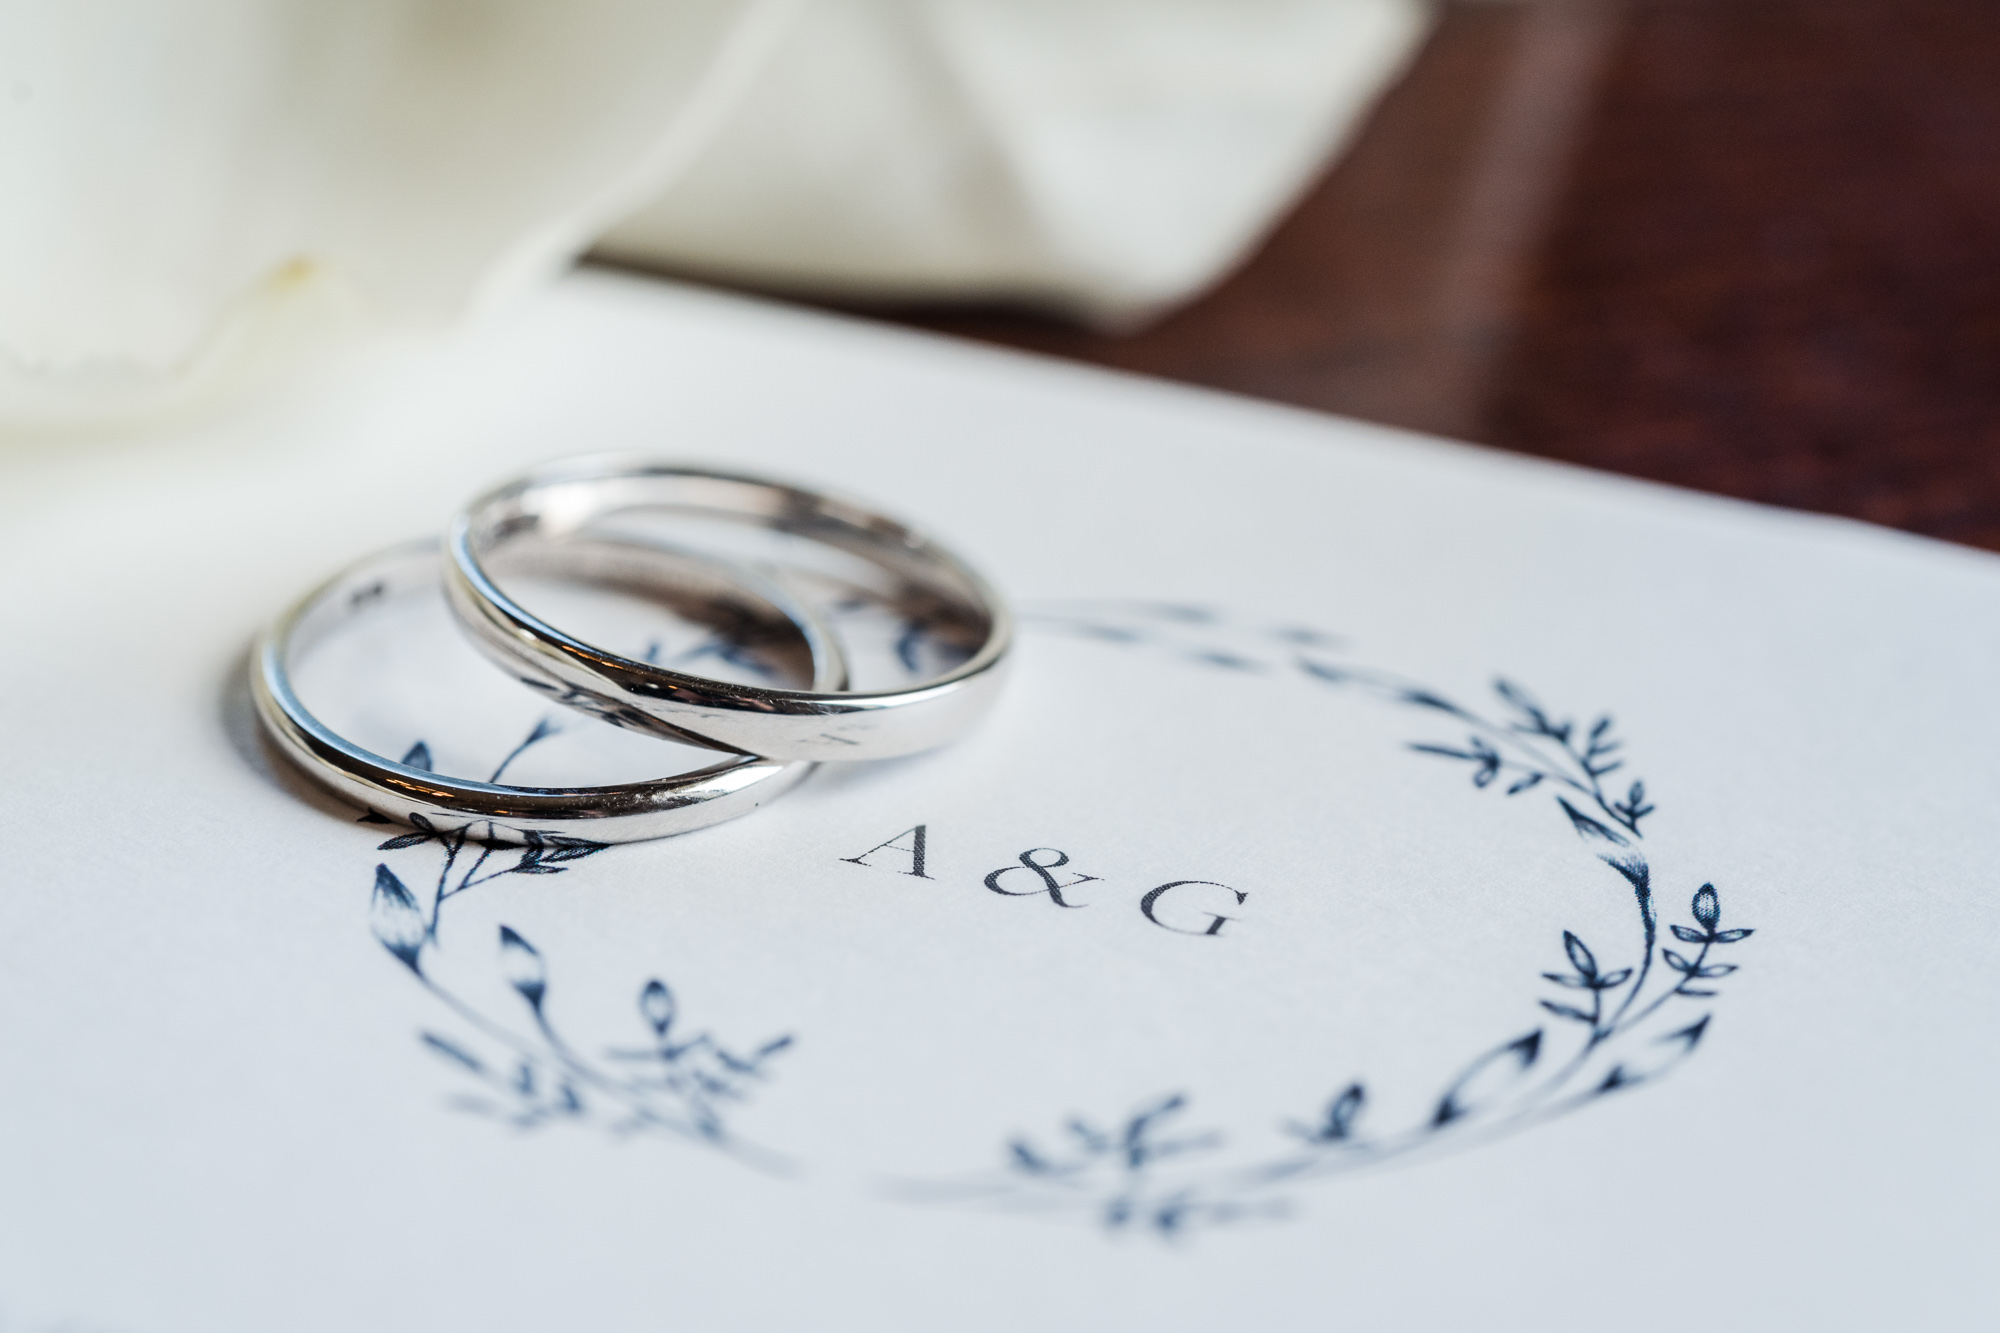 close up photo of couples wedding rings lay on the wedding invitation